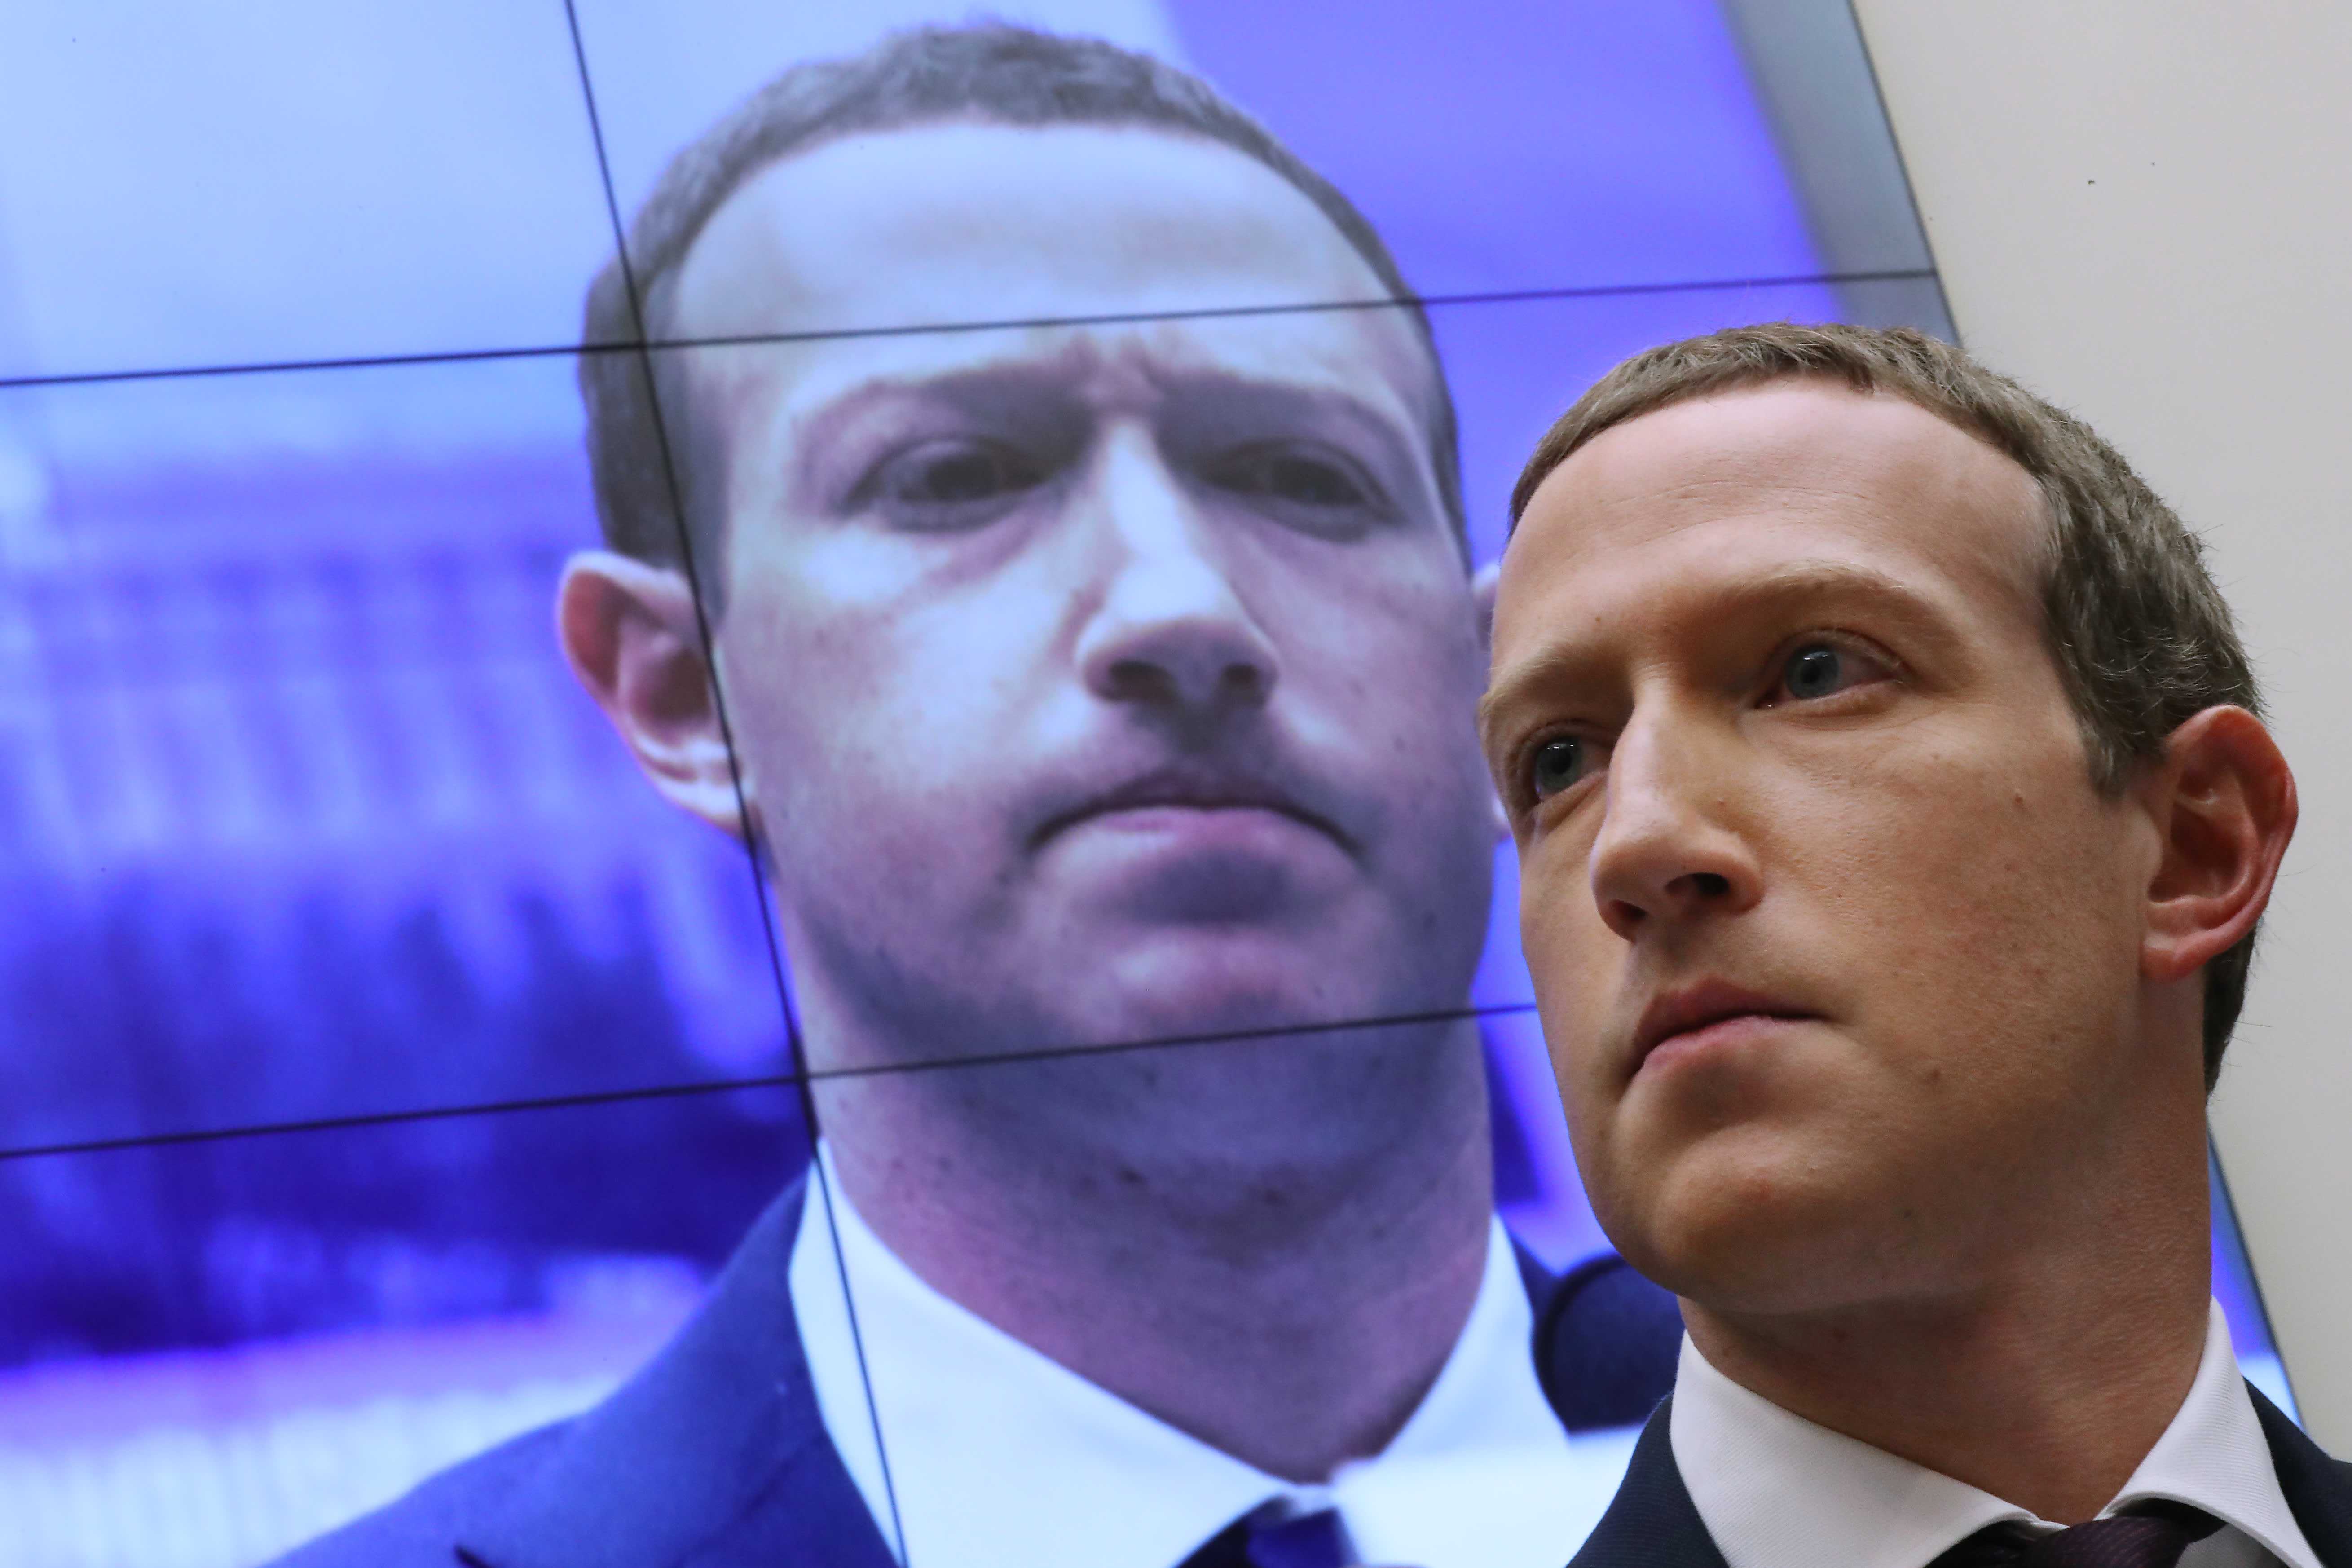 Facebook whistleblower releases documents to multiple news outlets showing company knows the harm it causes